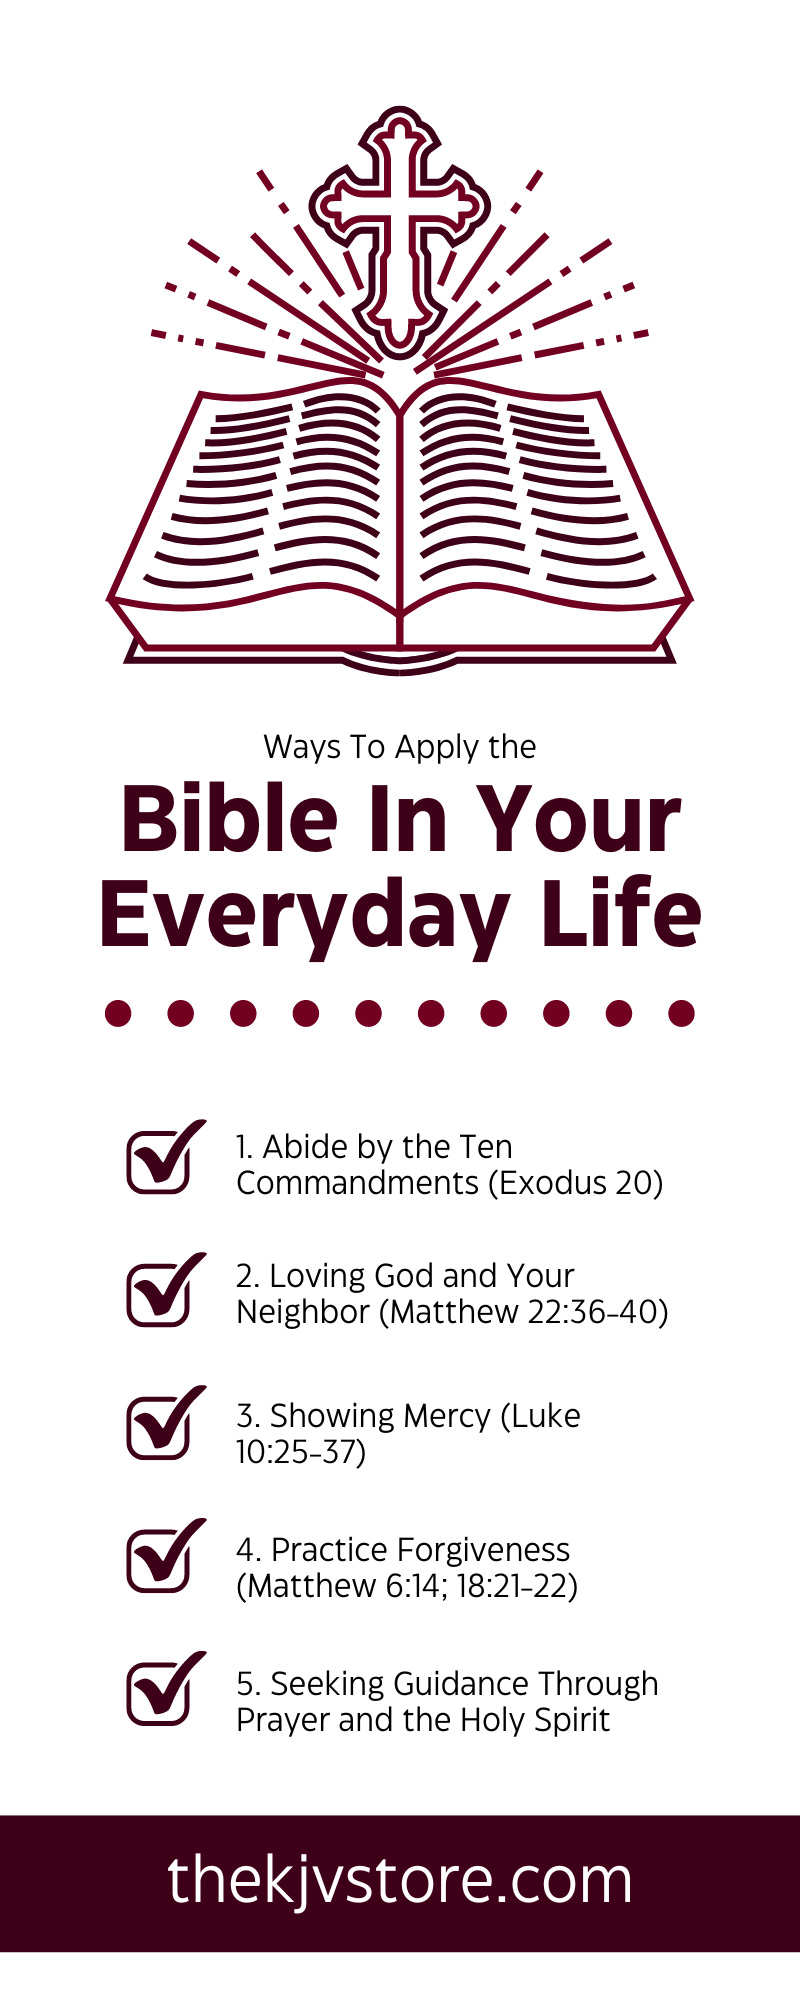 Ten Ways To Apply the Bible In Your Everyday Life